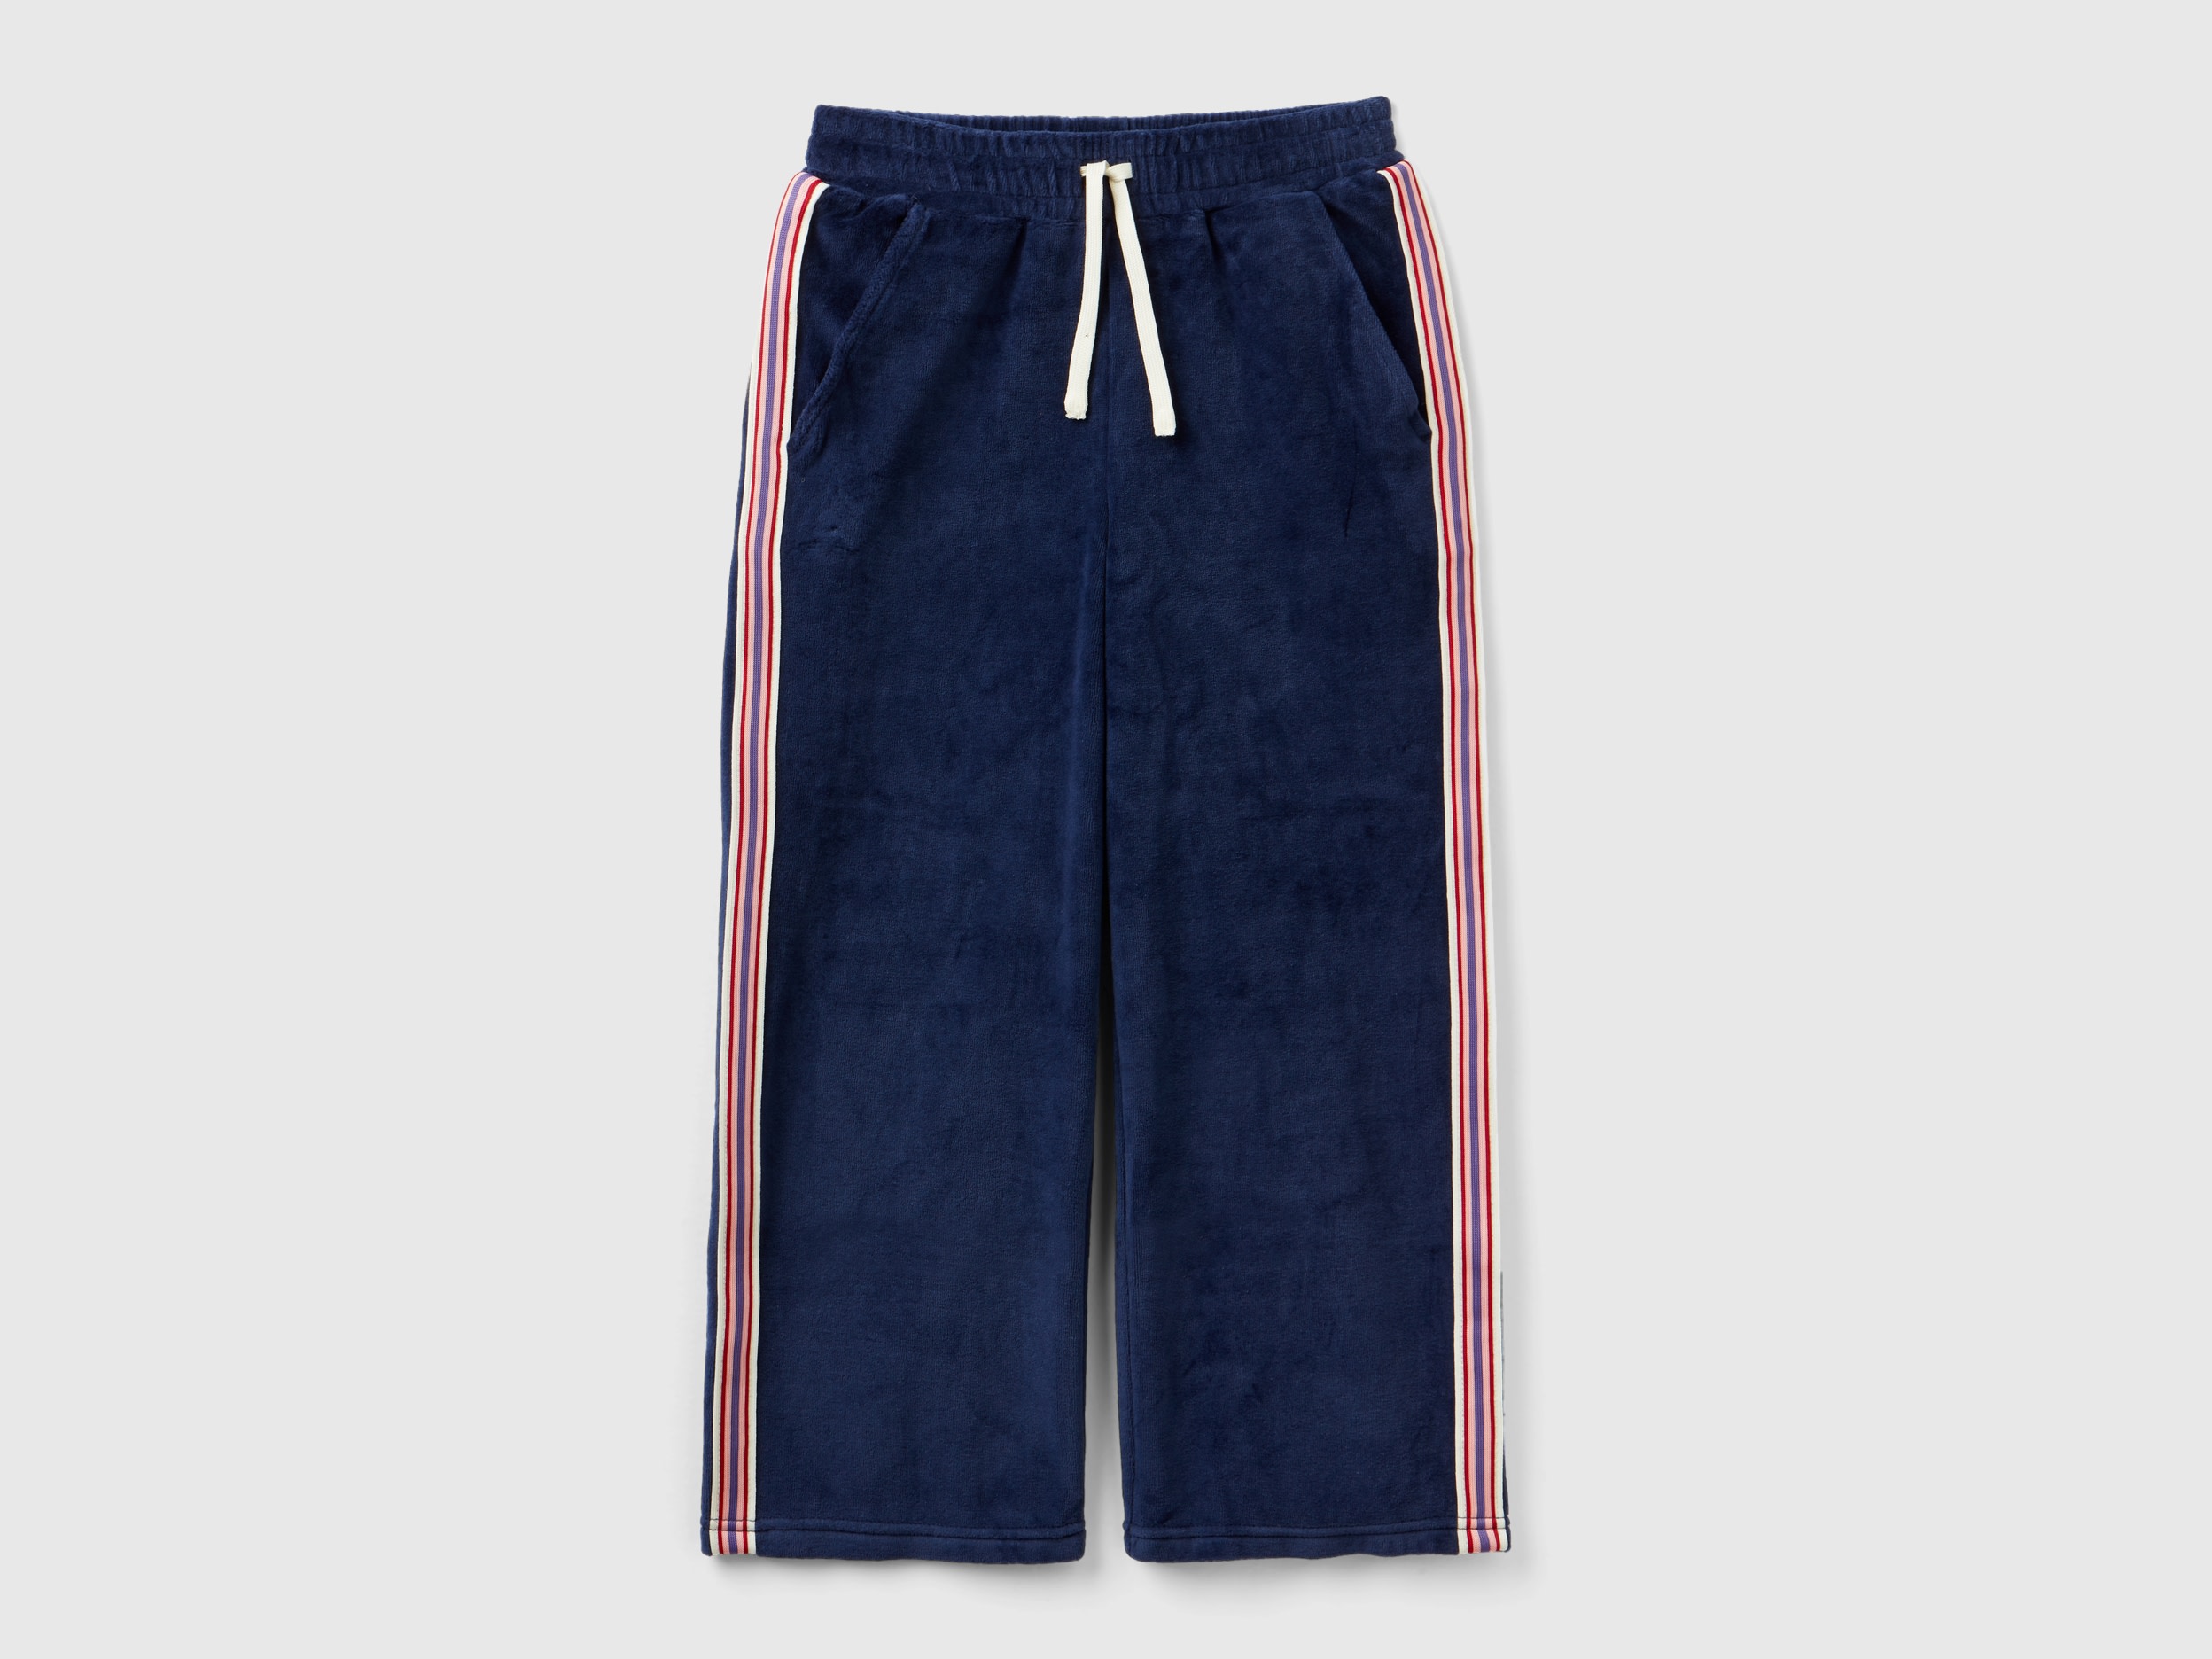 Benetton, Chenille Trousers With Striped Bands, size 2XL, Dark Blue, Kids